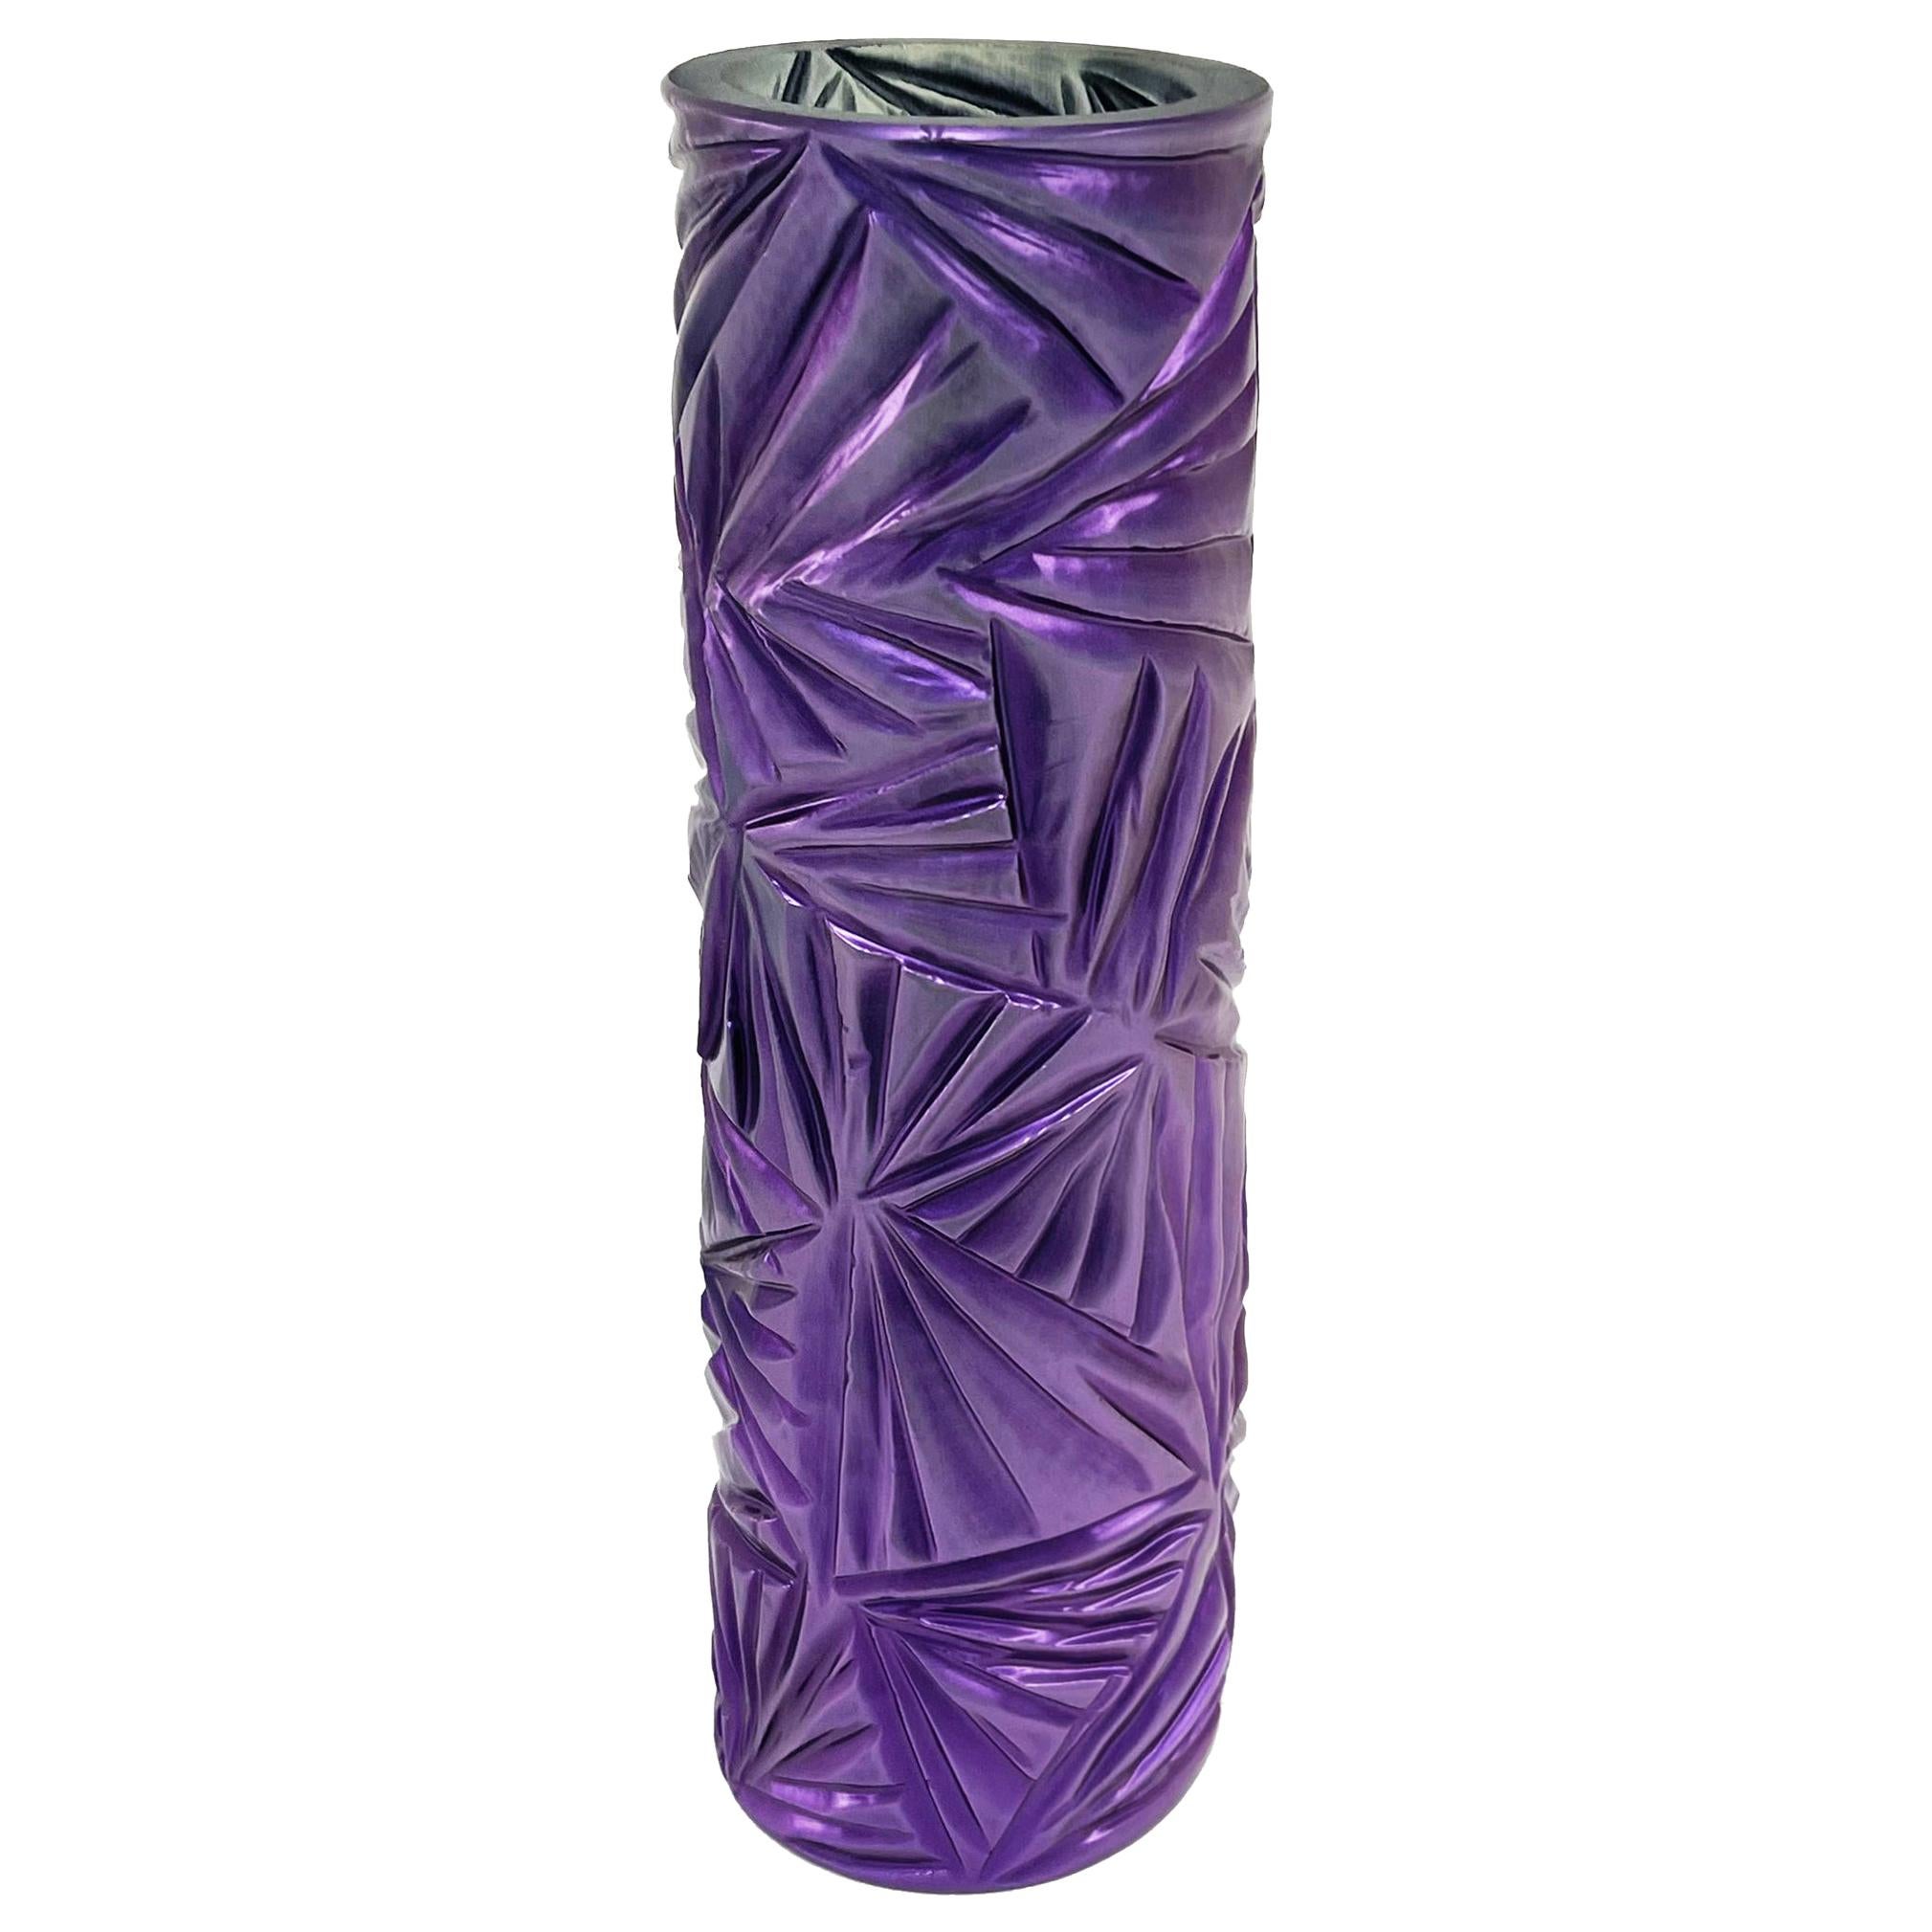 Contemporary Vase Purple Crystal Hand Engraved by Ghirò Studio